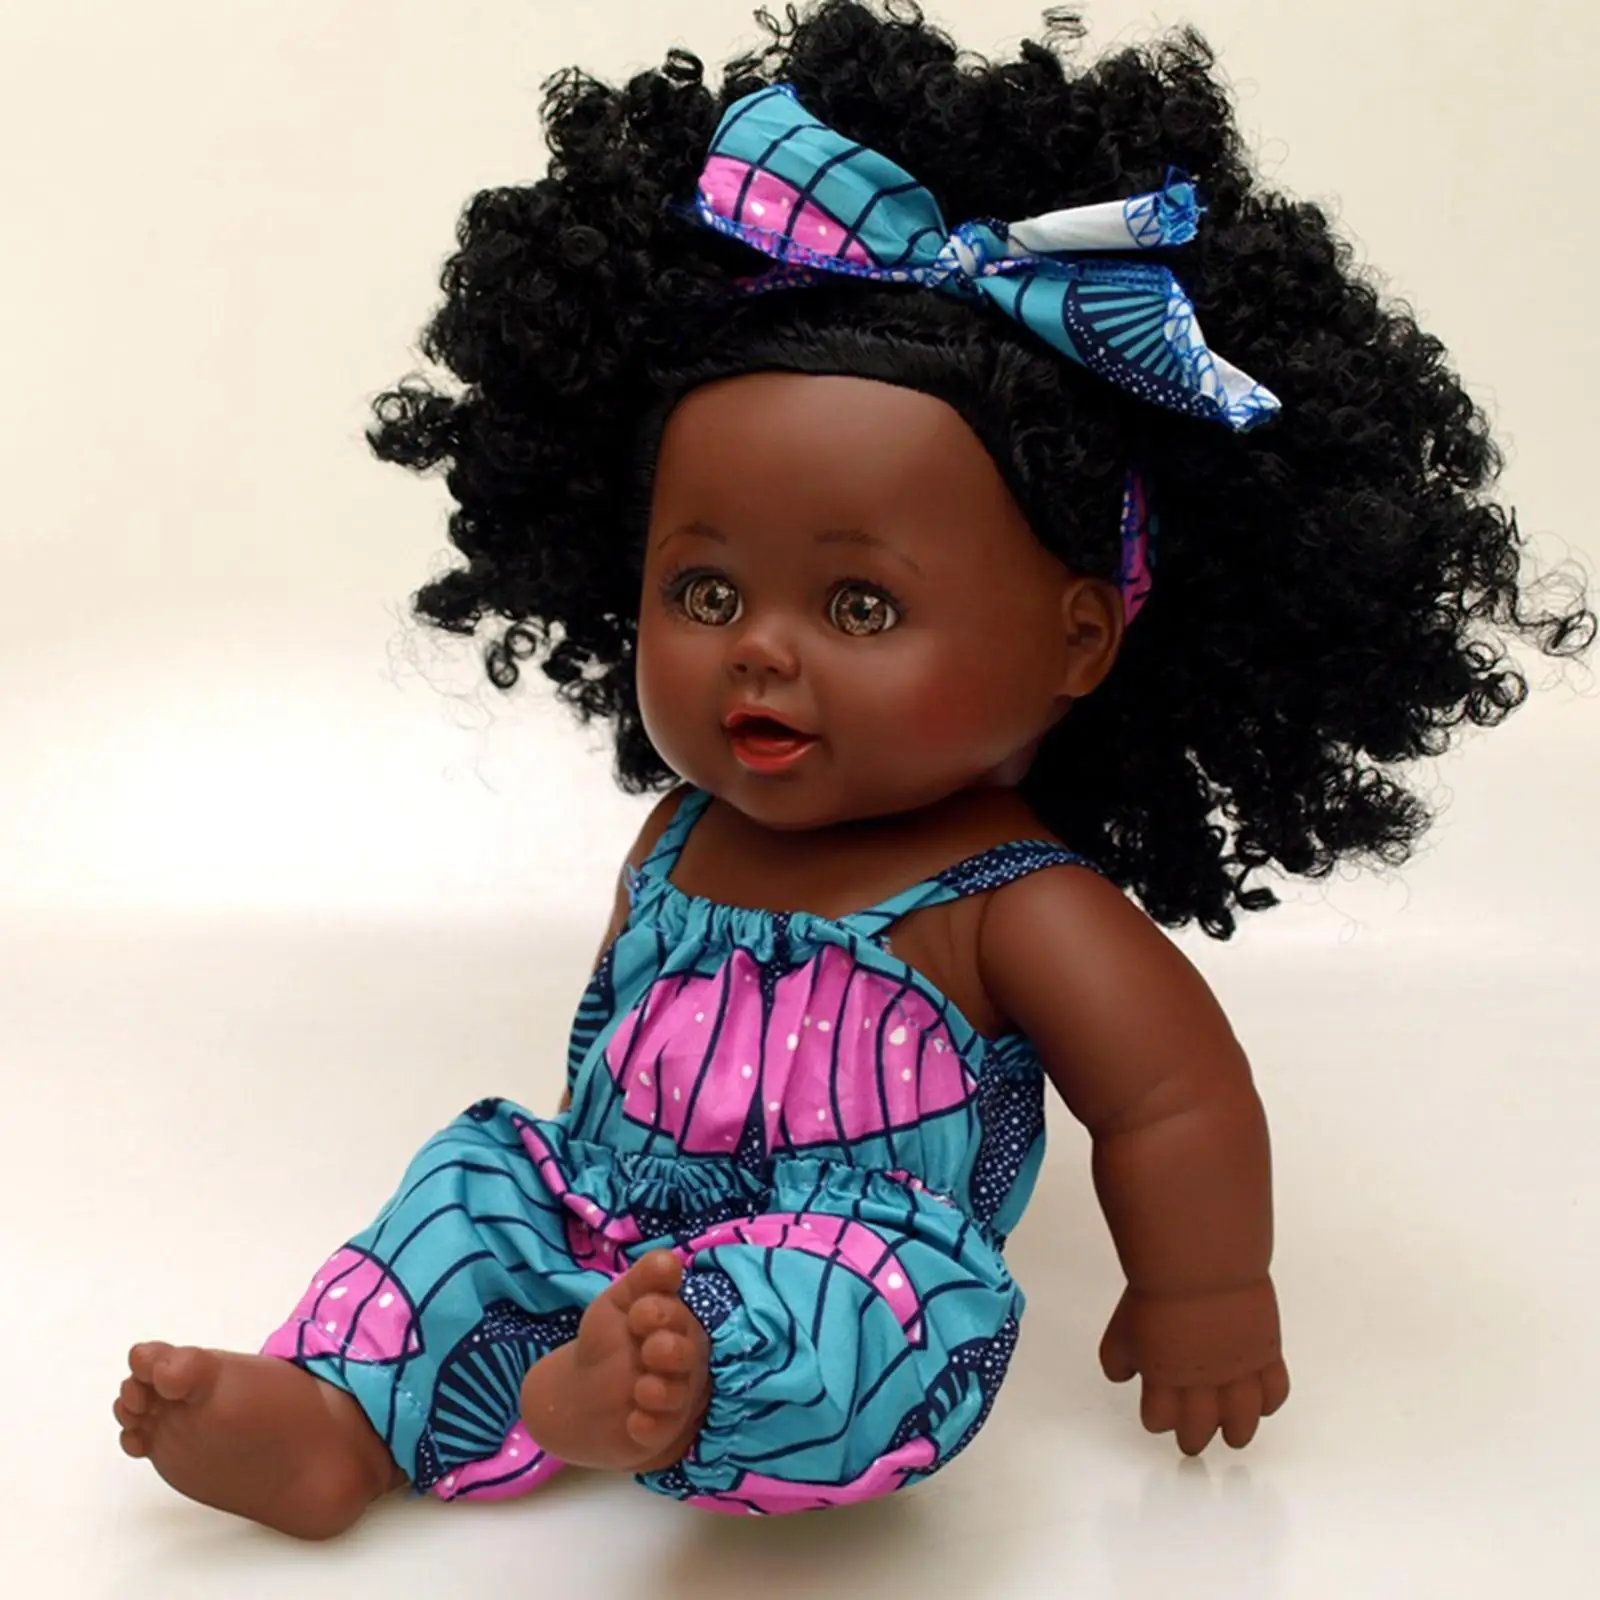 Cute Baby Doll 30cm Black Skin DIY with Clothes Curly Hair Realistic  African Baby Doll Black Girl Doll for Toddler Infants Kids|Dolls| -  AliExpress